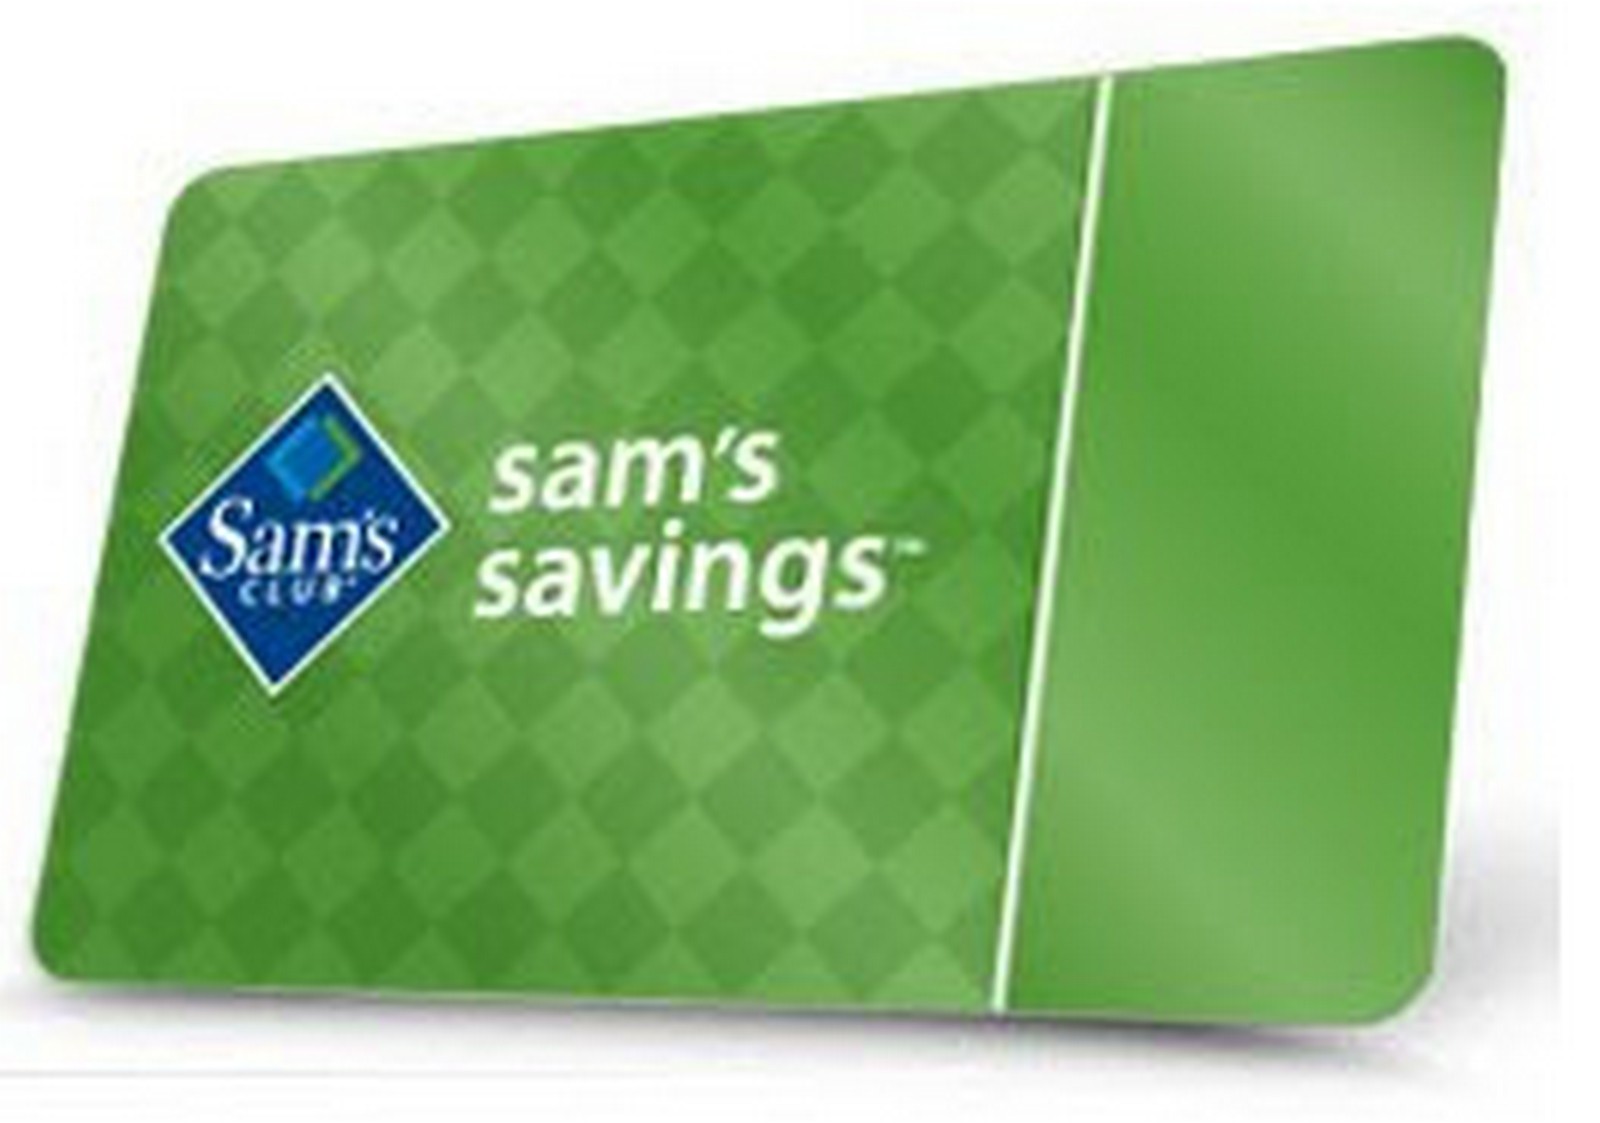 Sams Club Amex Offer Get 25 Back With New Membership - 